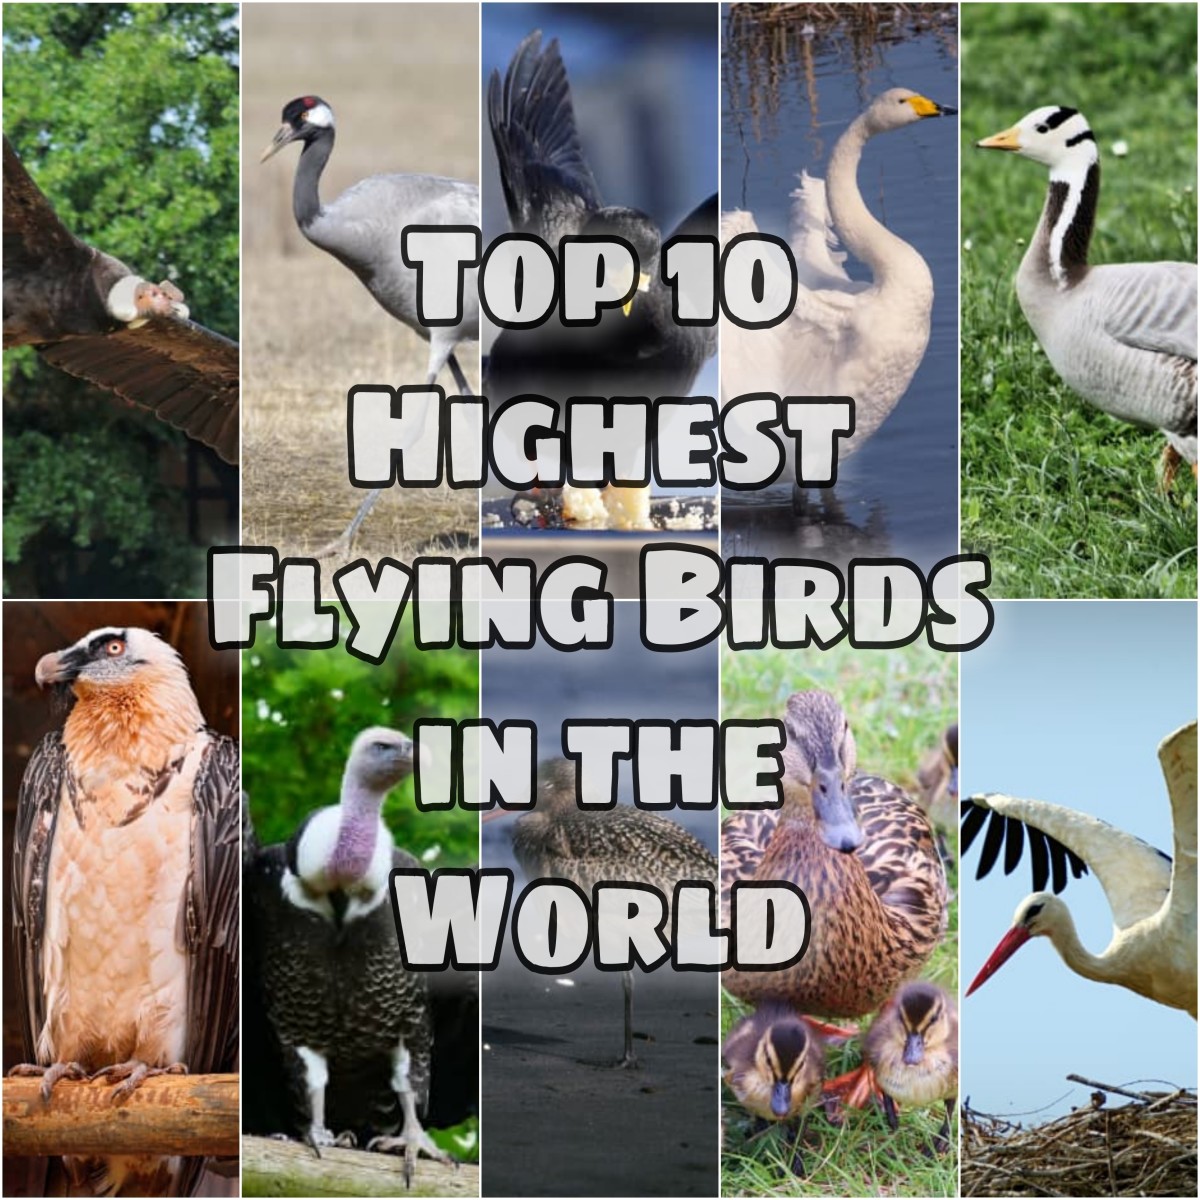 This article discusses the top 10 highest flying birds in the world.